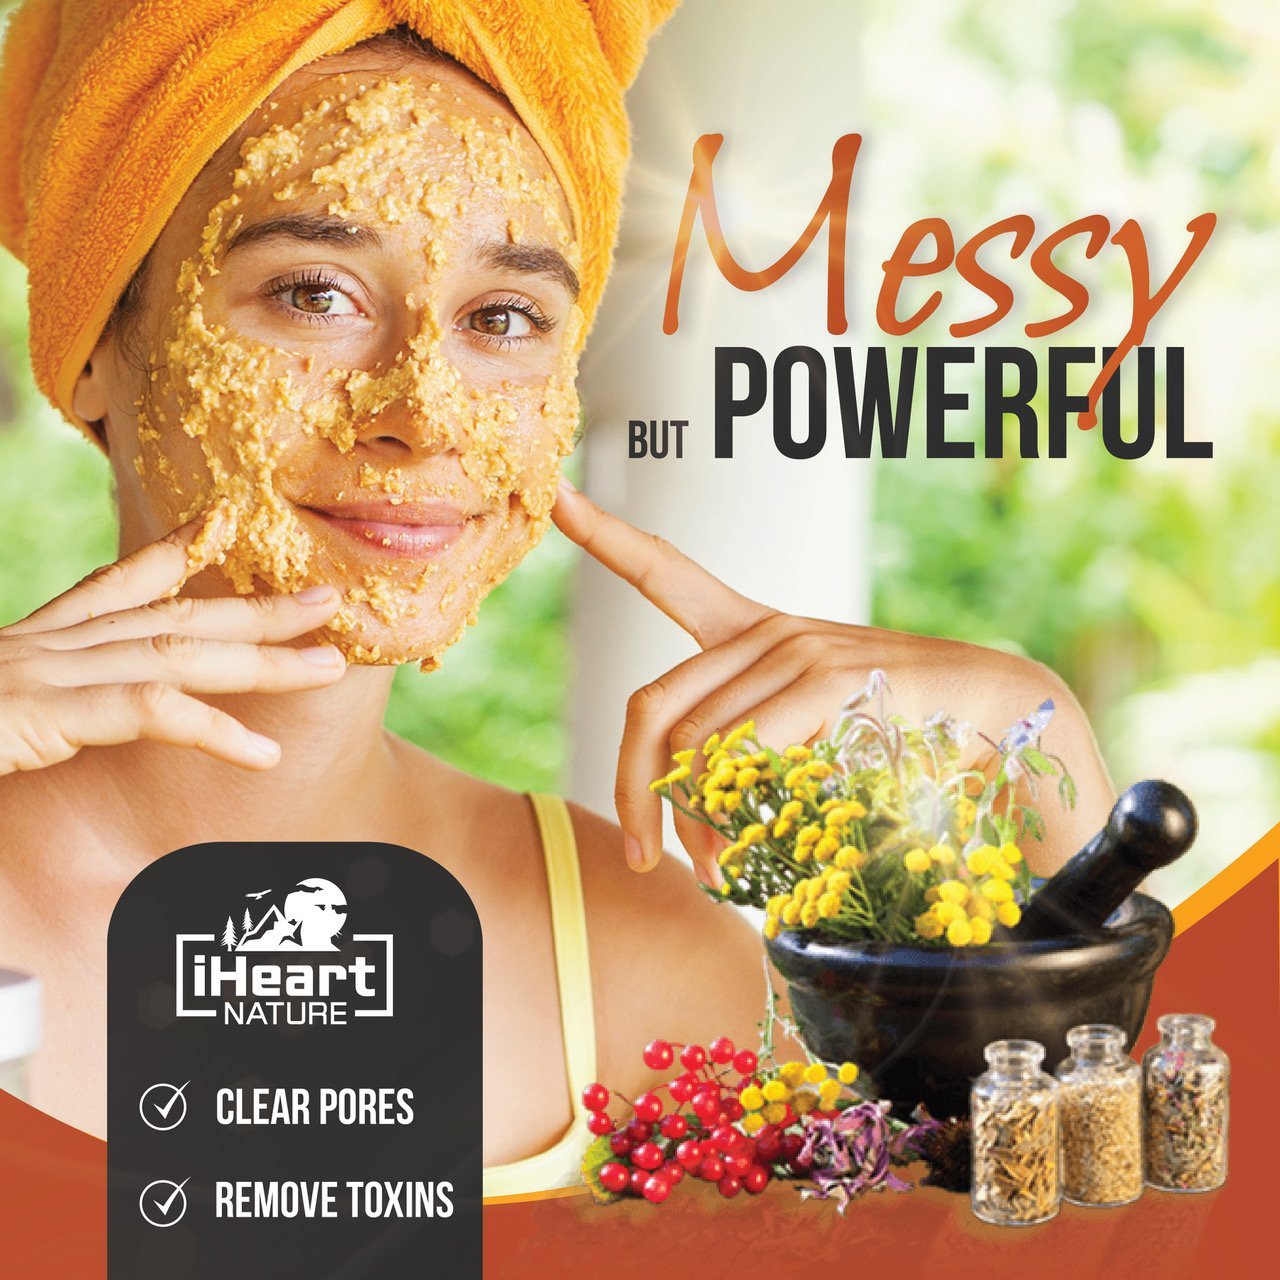 Turmeric Face Mask (DIY Powder) with Red Sandalwood & Fenugreek - Natural Clear Soft Skin Glow - iHeart Nature